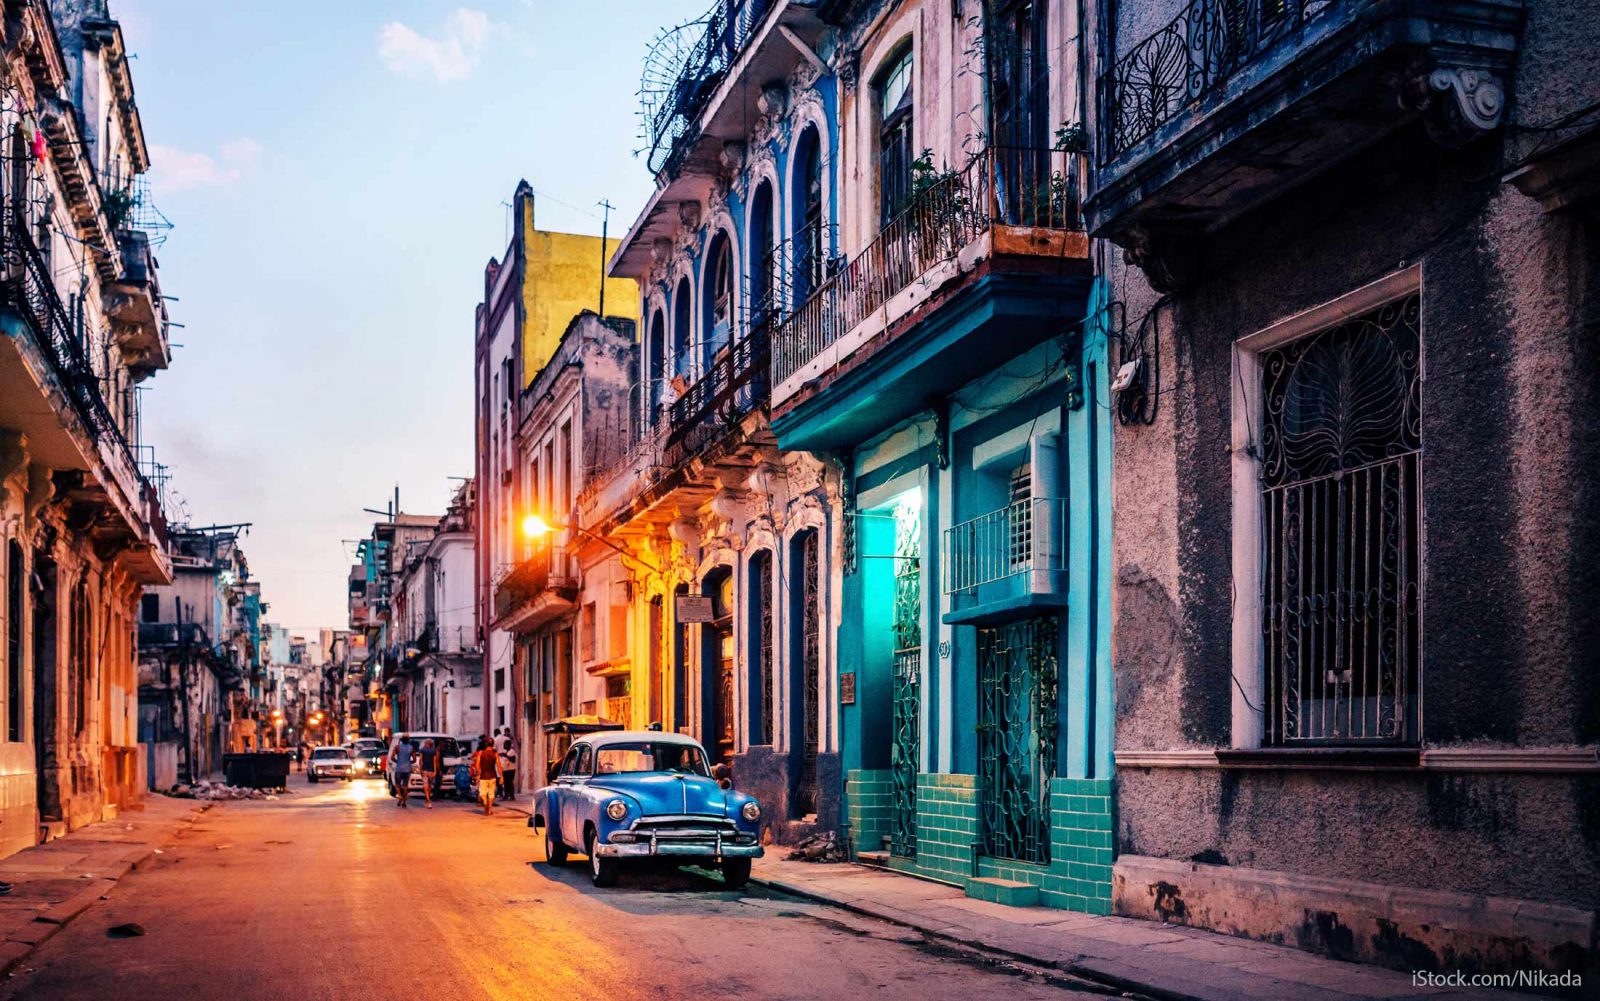 Anyone With the Most Basic Geographic Knowledge Should Get 19/26 on This Quiz Cuba